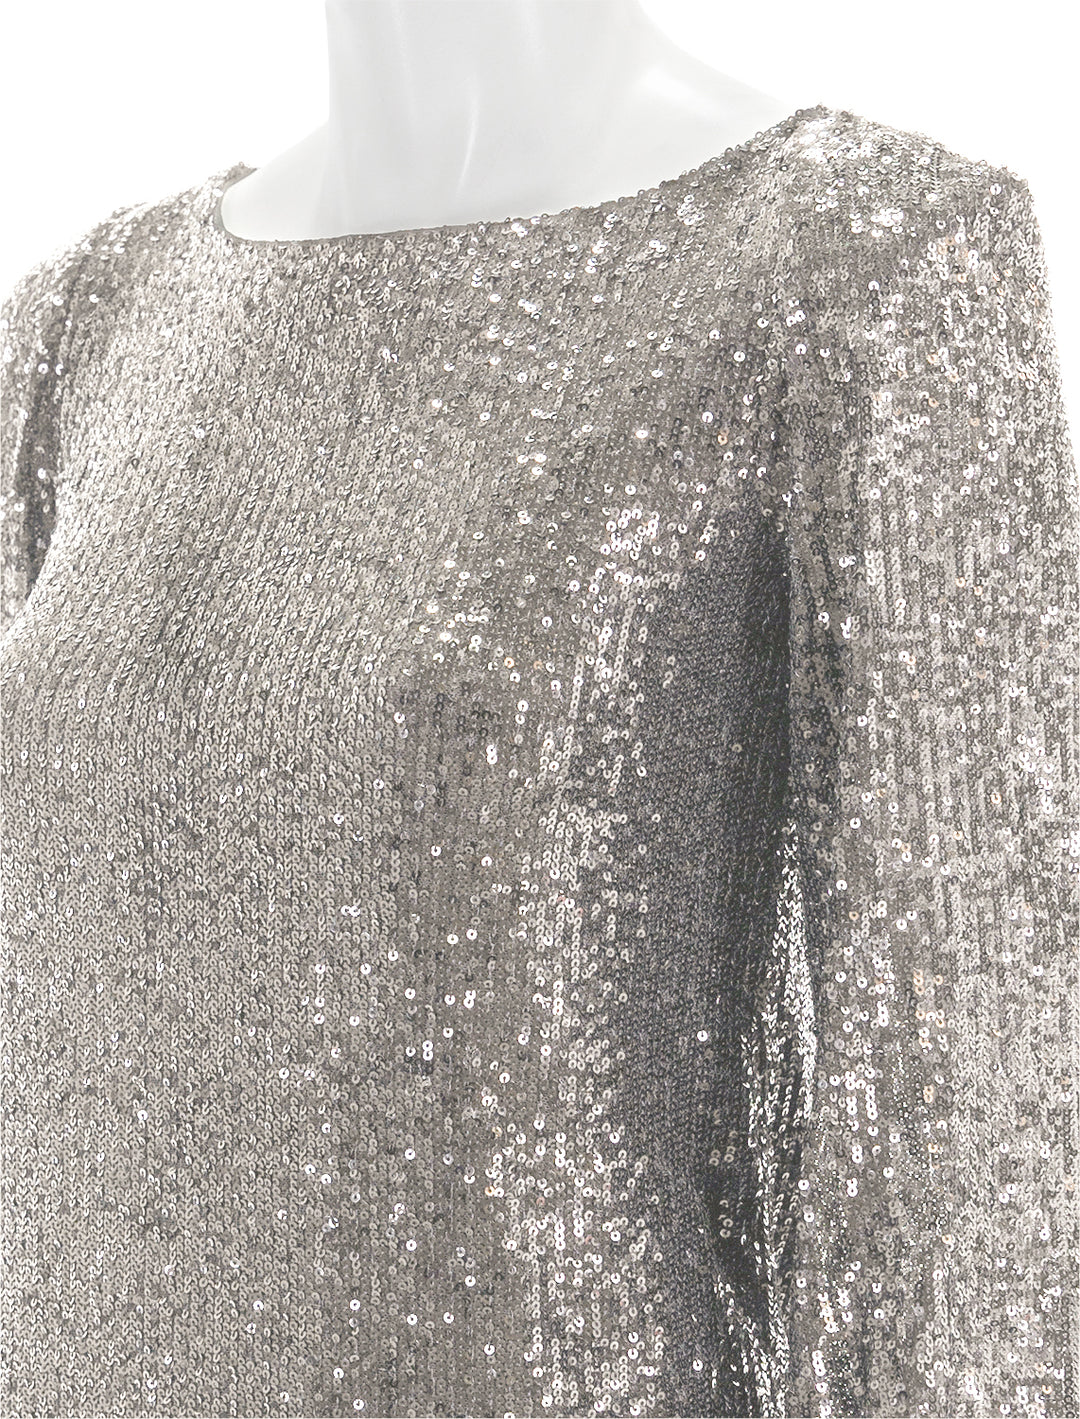 Close-up view of Steve Madden's delorean dress in silver.